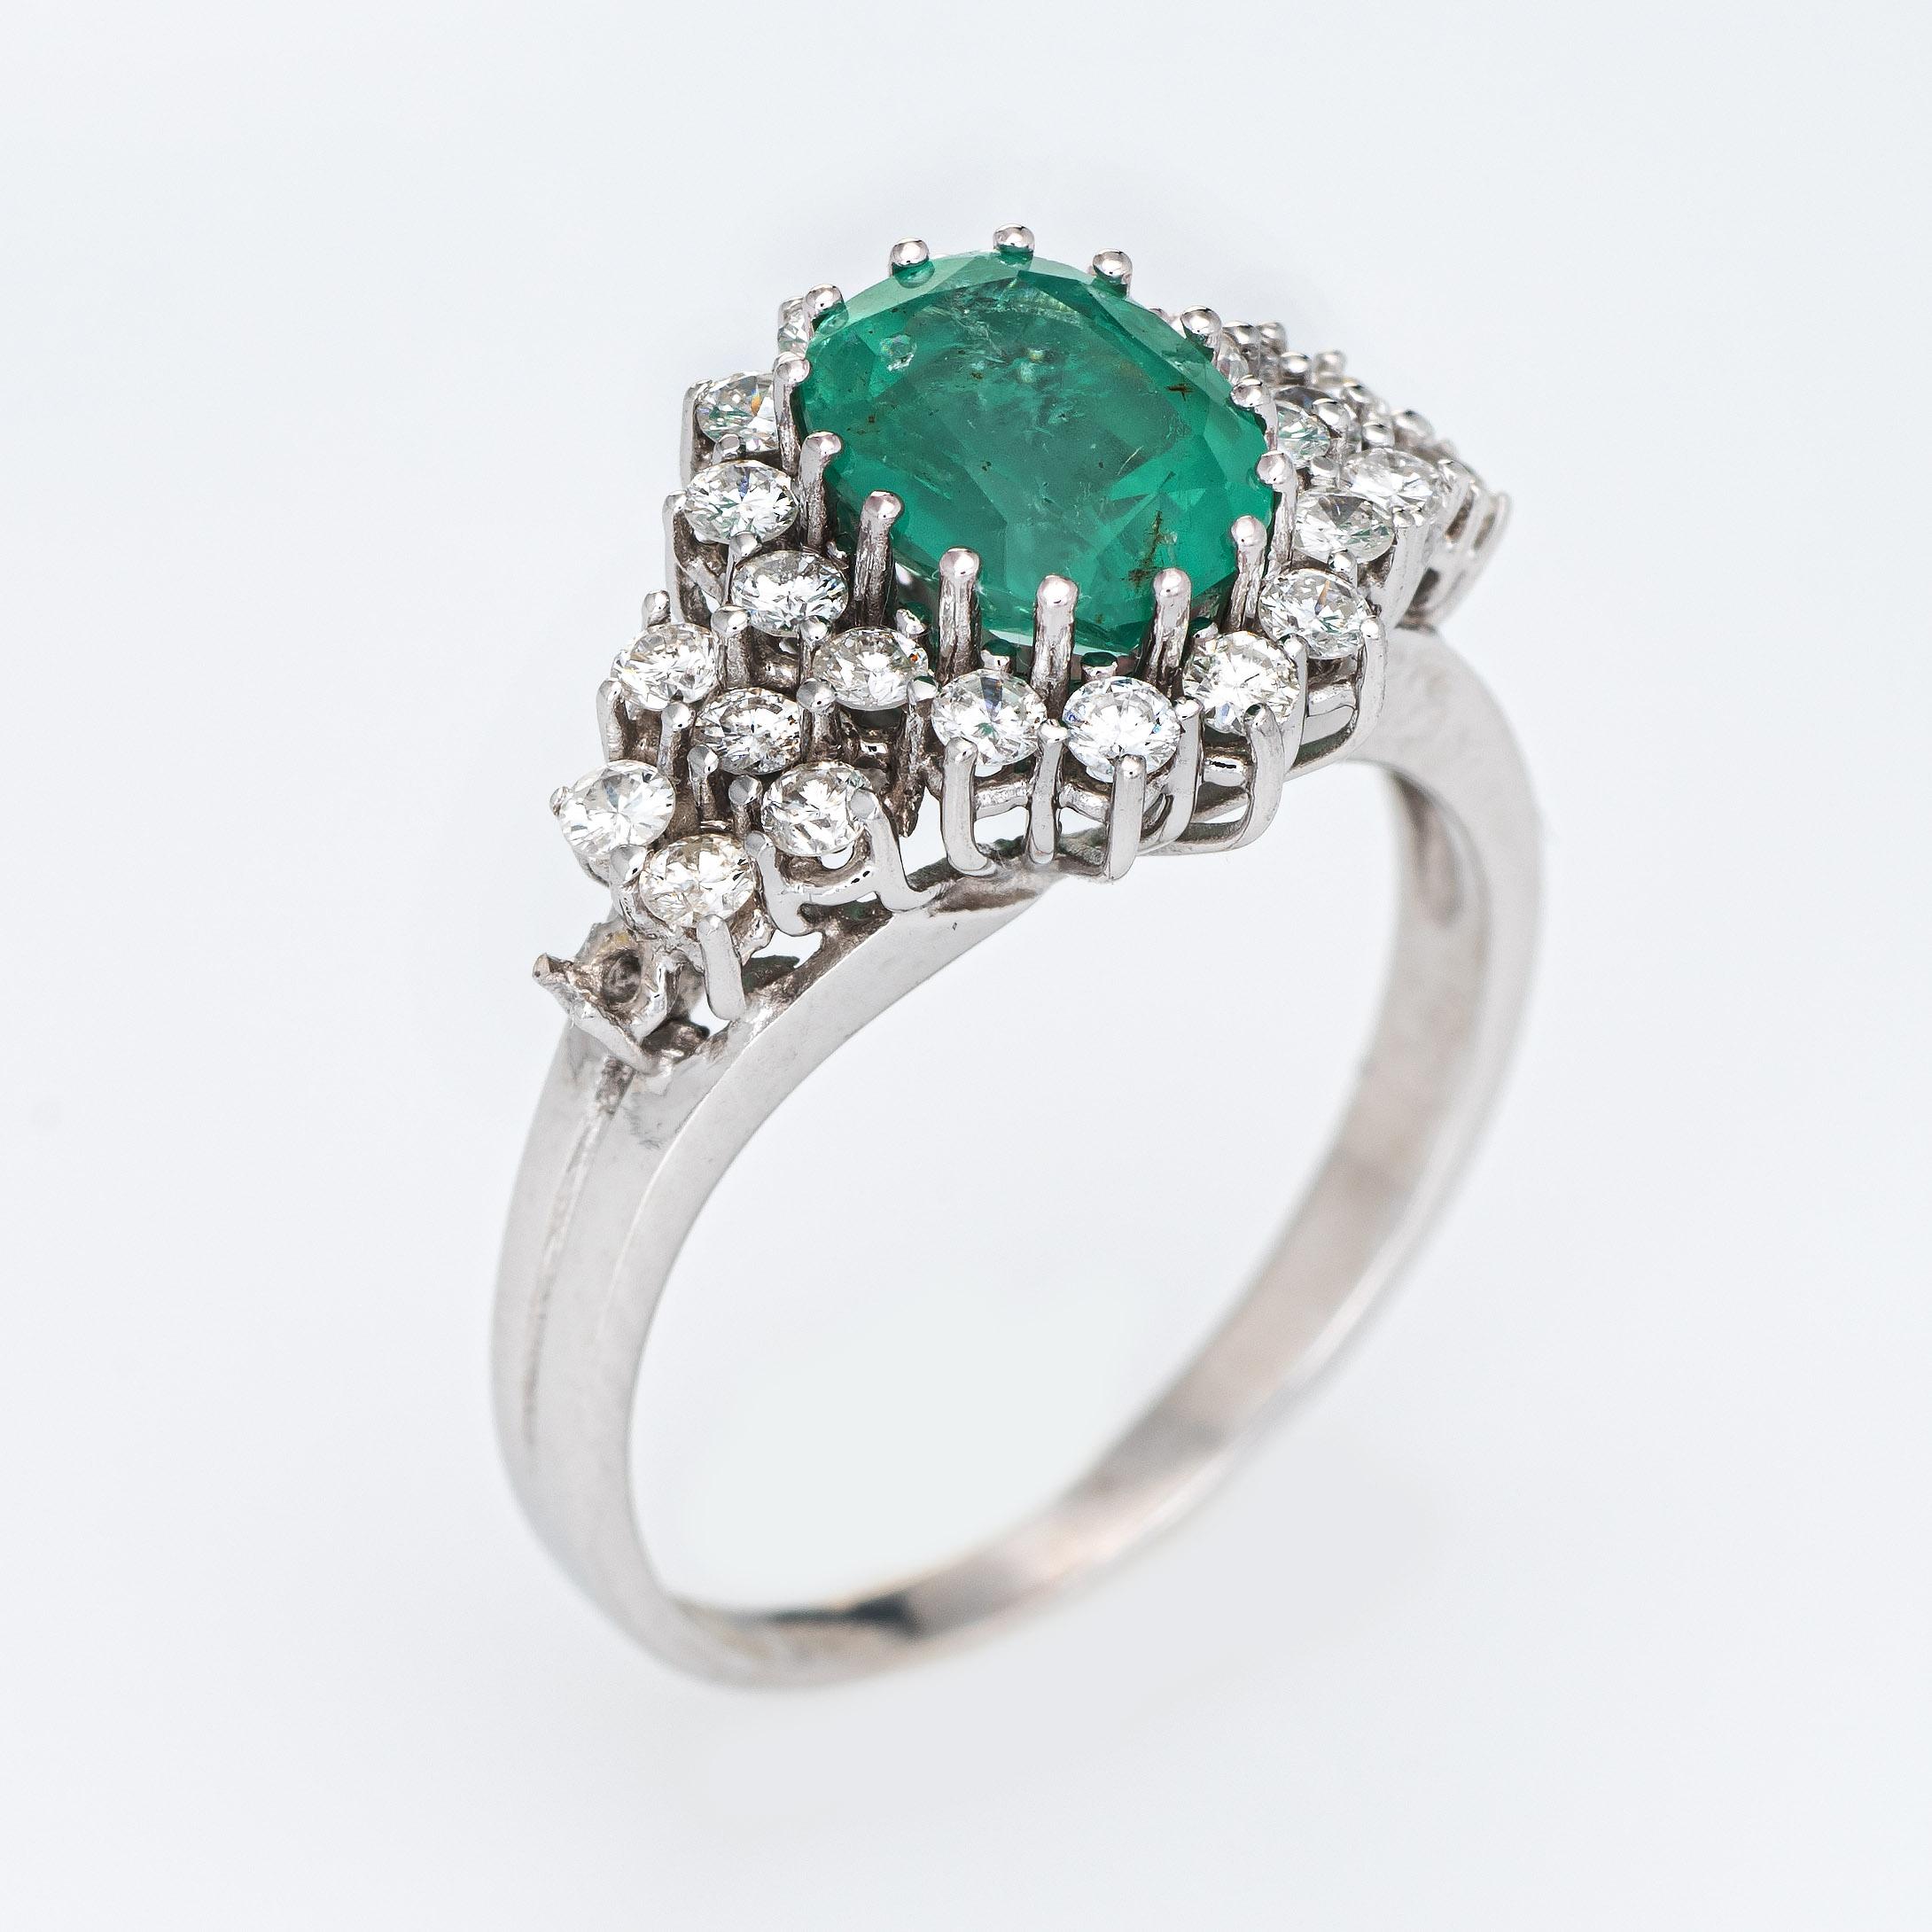 Stylish emerald & diamond ring (circa 2000s) crafted in 14k white gold. 

28 round brilliant cut diamonds total an estimated 0.78 carats (estimated at G-H color and VS2 clarity). The emerald measures 8.5mm x 6.5mm (estimated at 2 carats). The